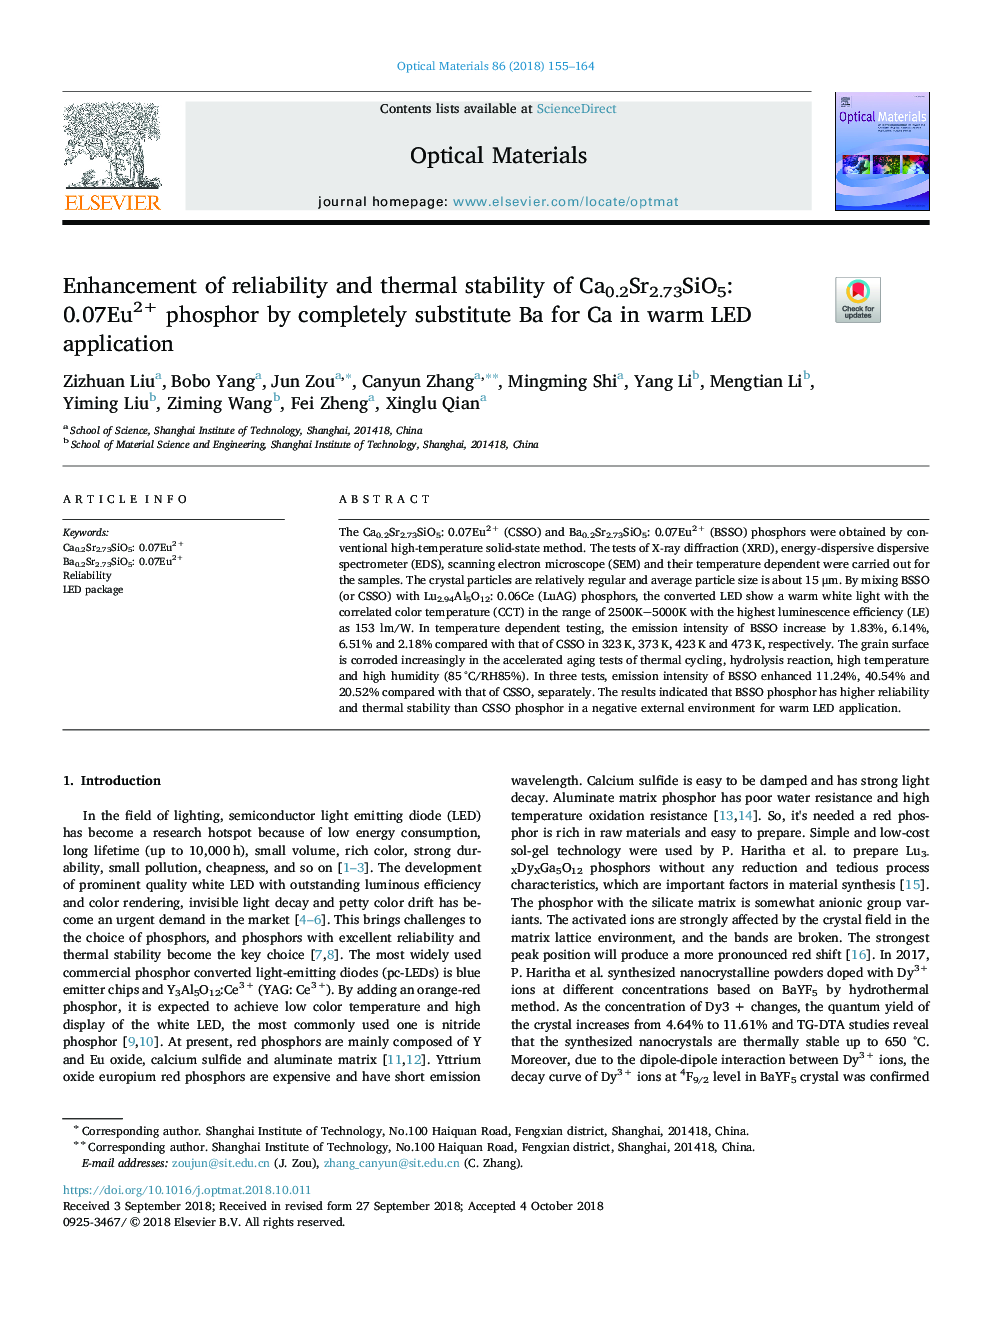 Enhancement of reliability and thermal stability of Ca0.2Sr2.73SiO5: 0.07Eu2+ phosphor by completely substitute Ba for Ca in warm LED application